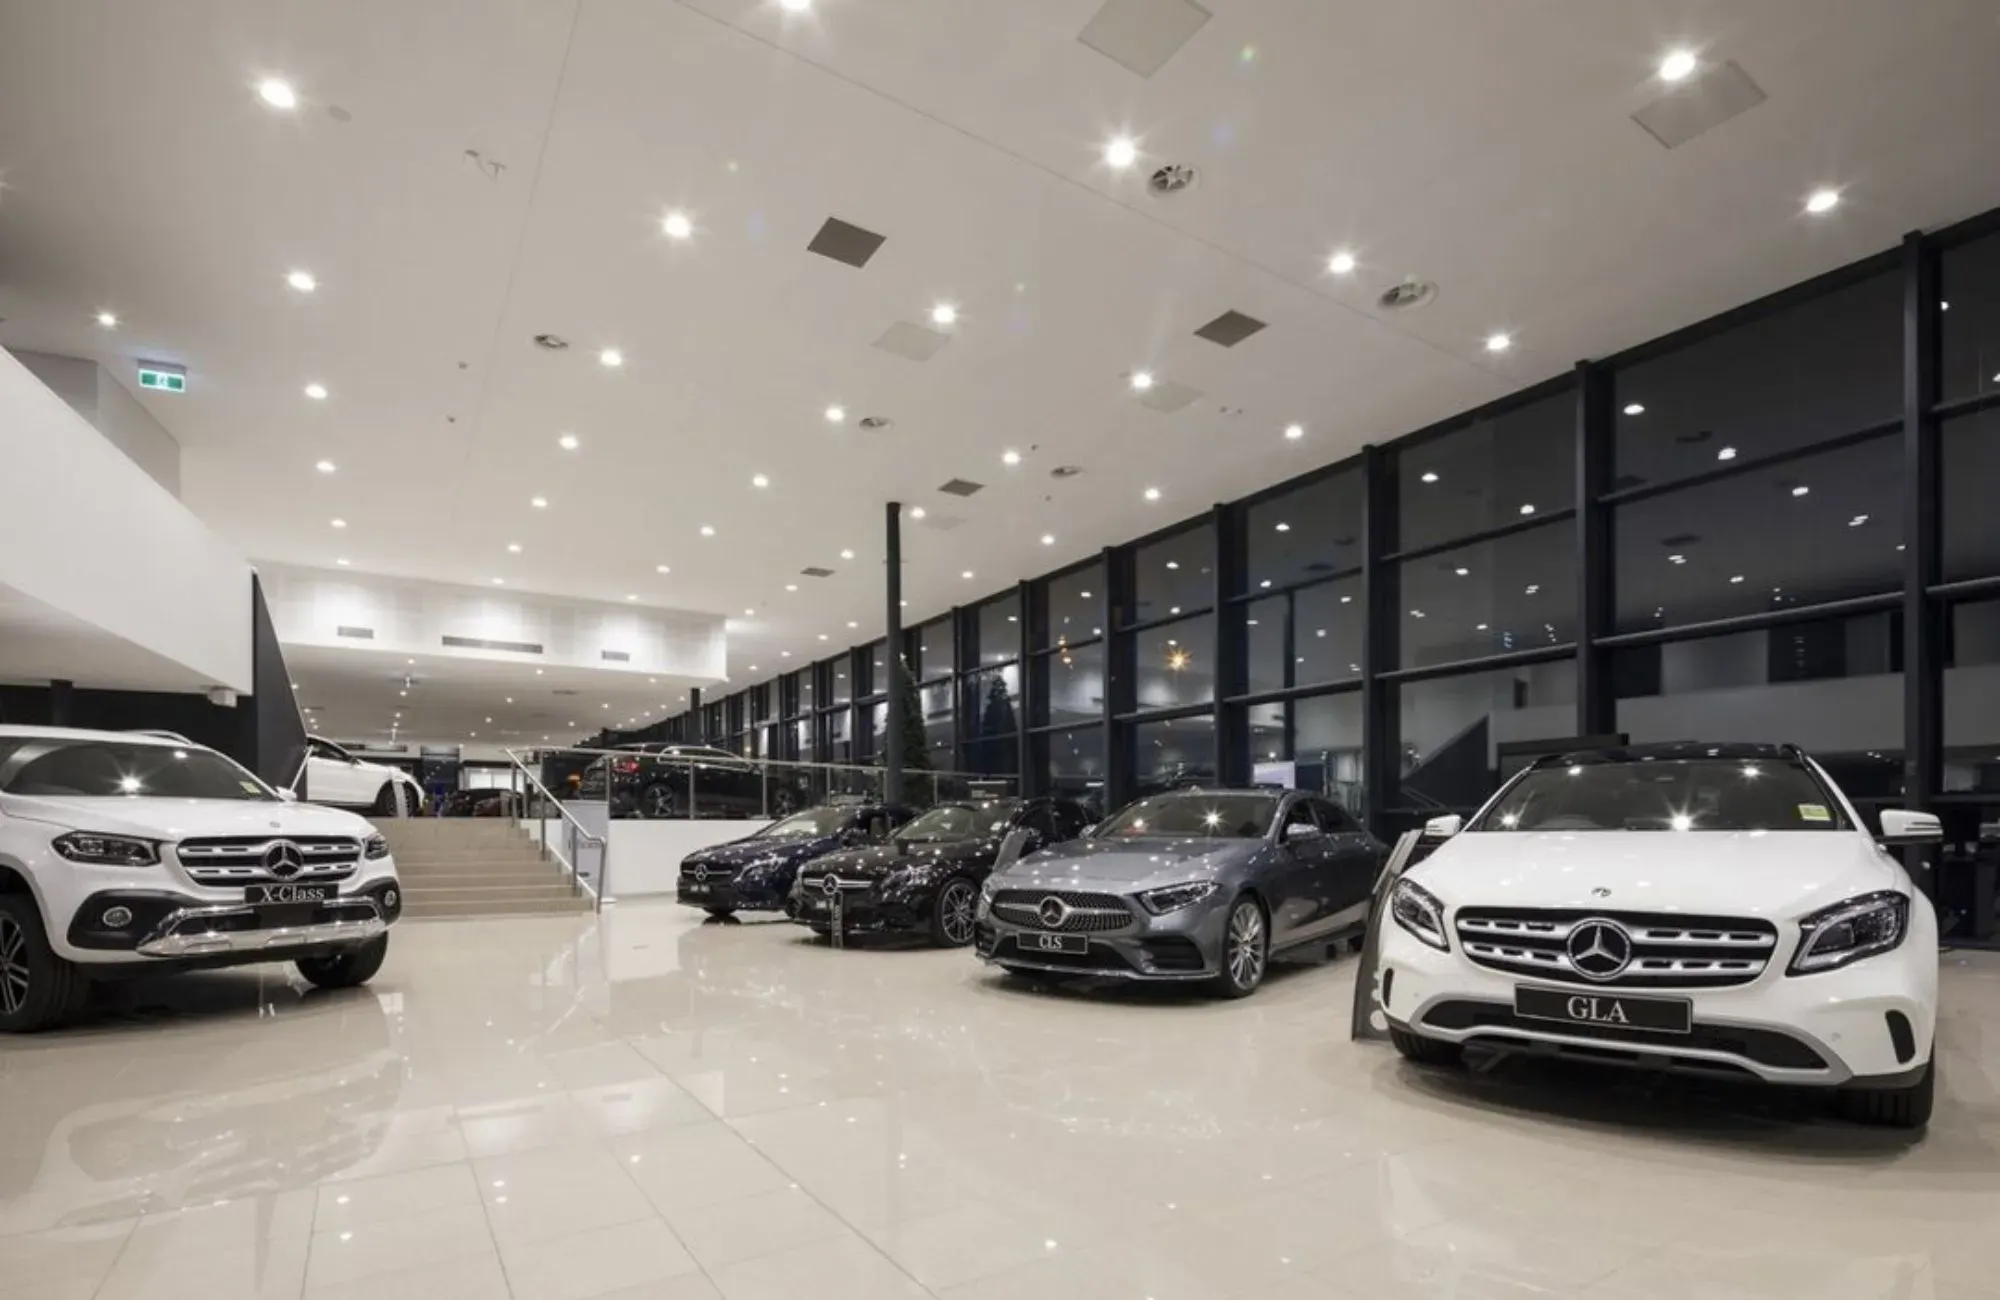 Mercedes Benz Showroom Interior by Watson Young Architects.